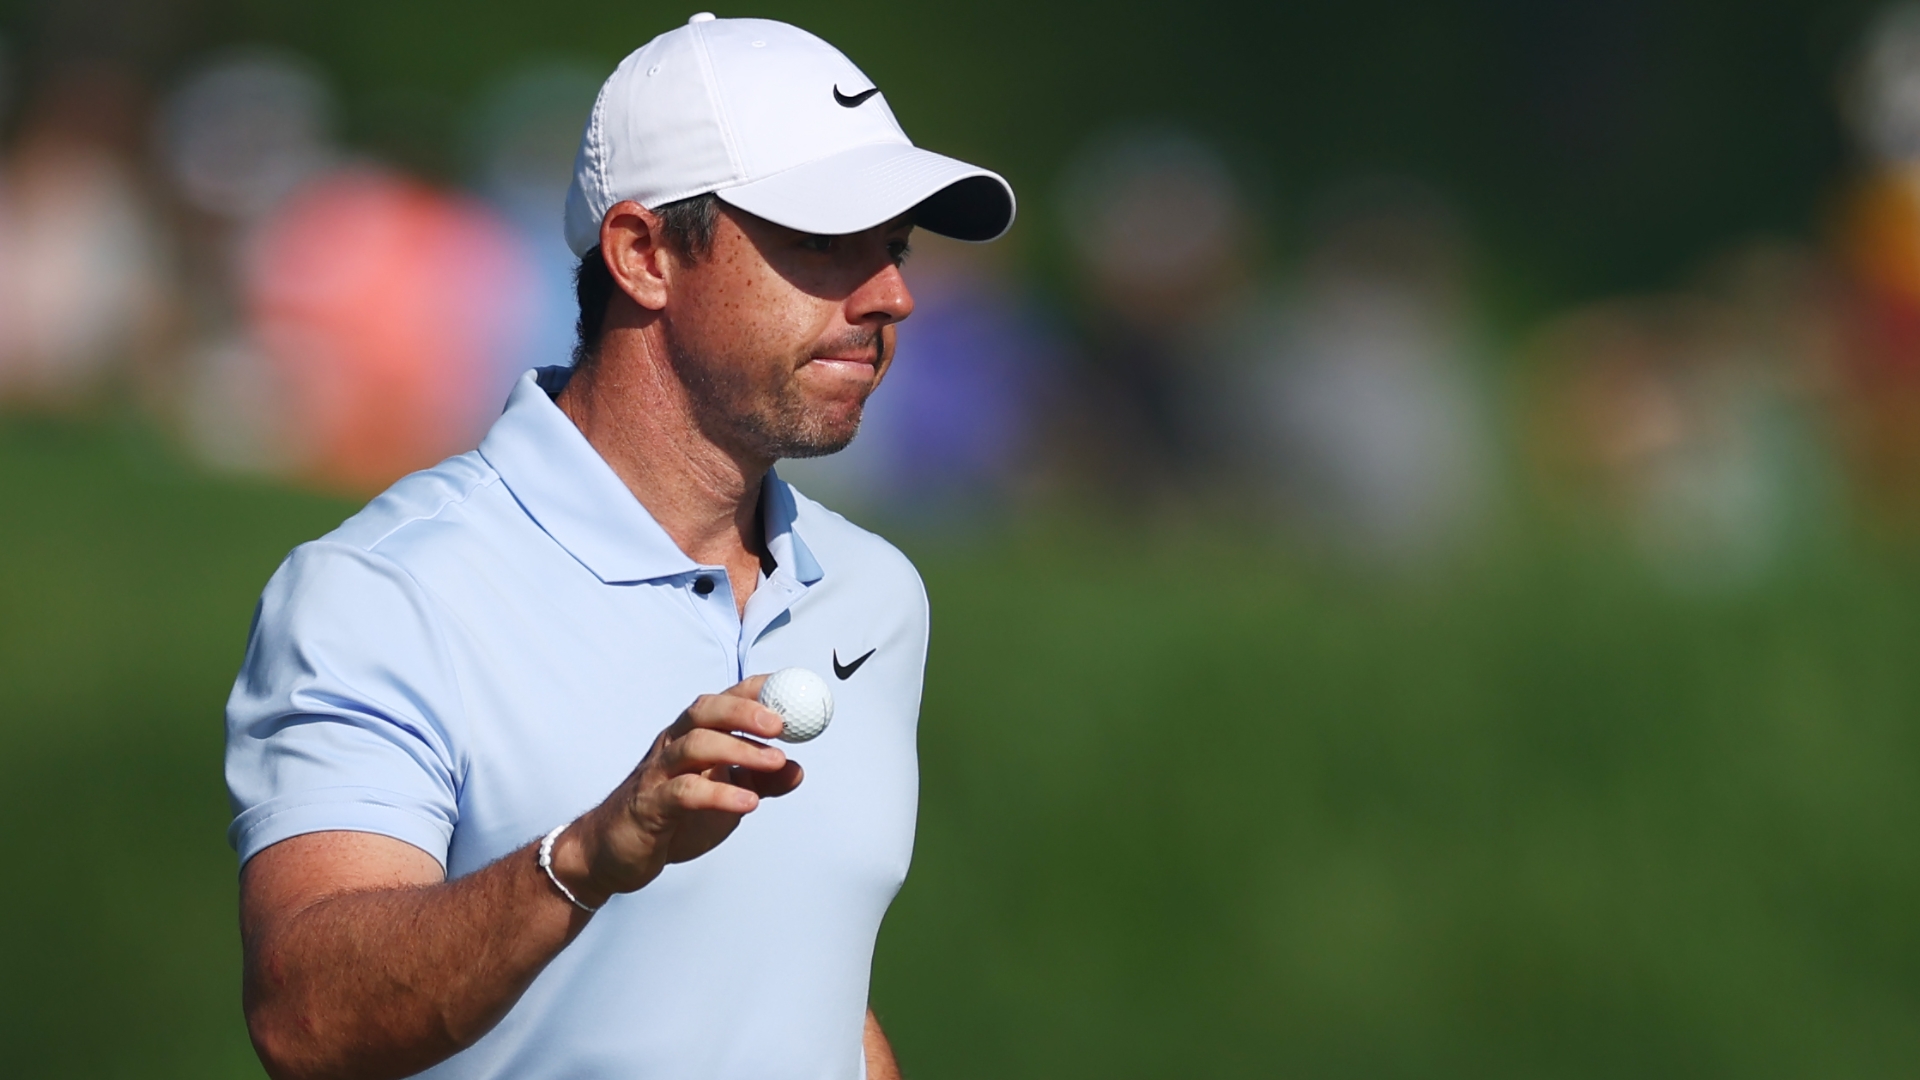 Rory McIlroy fist-bumps after chipping in for birdie